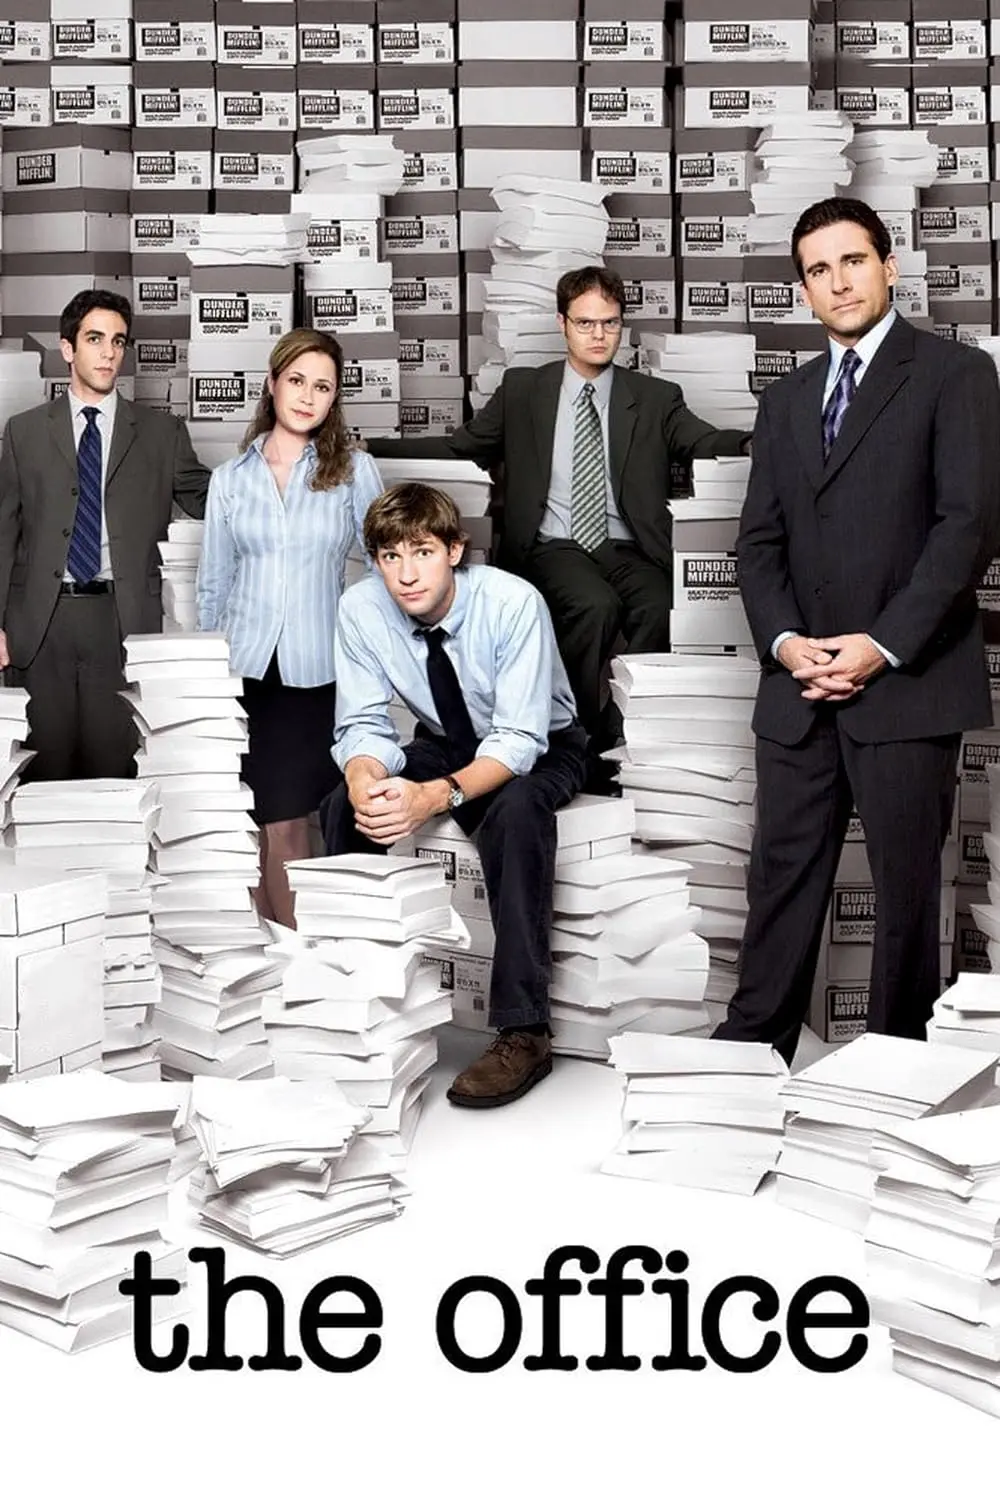 The Office (TV Series) (2005-2013)
